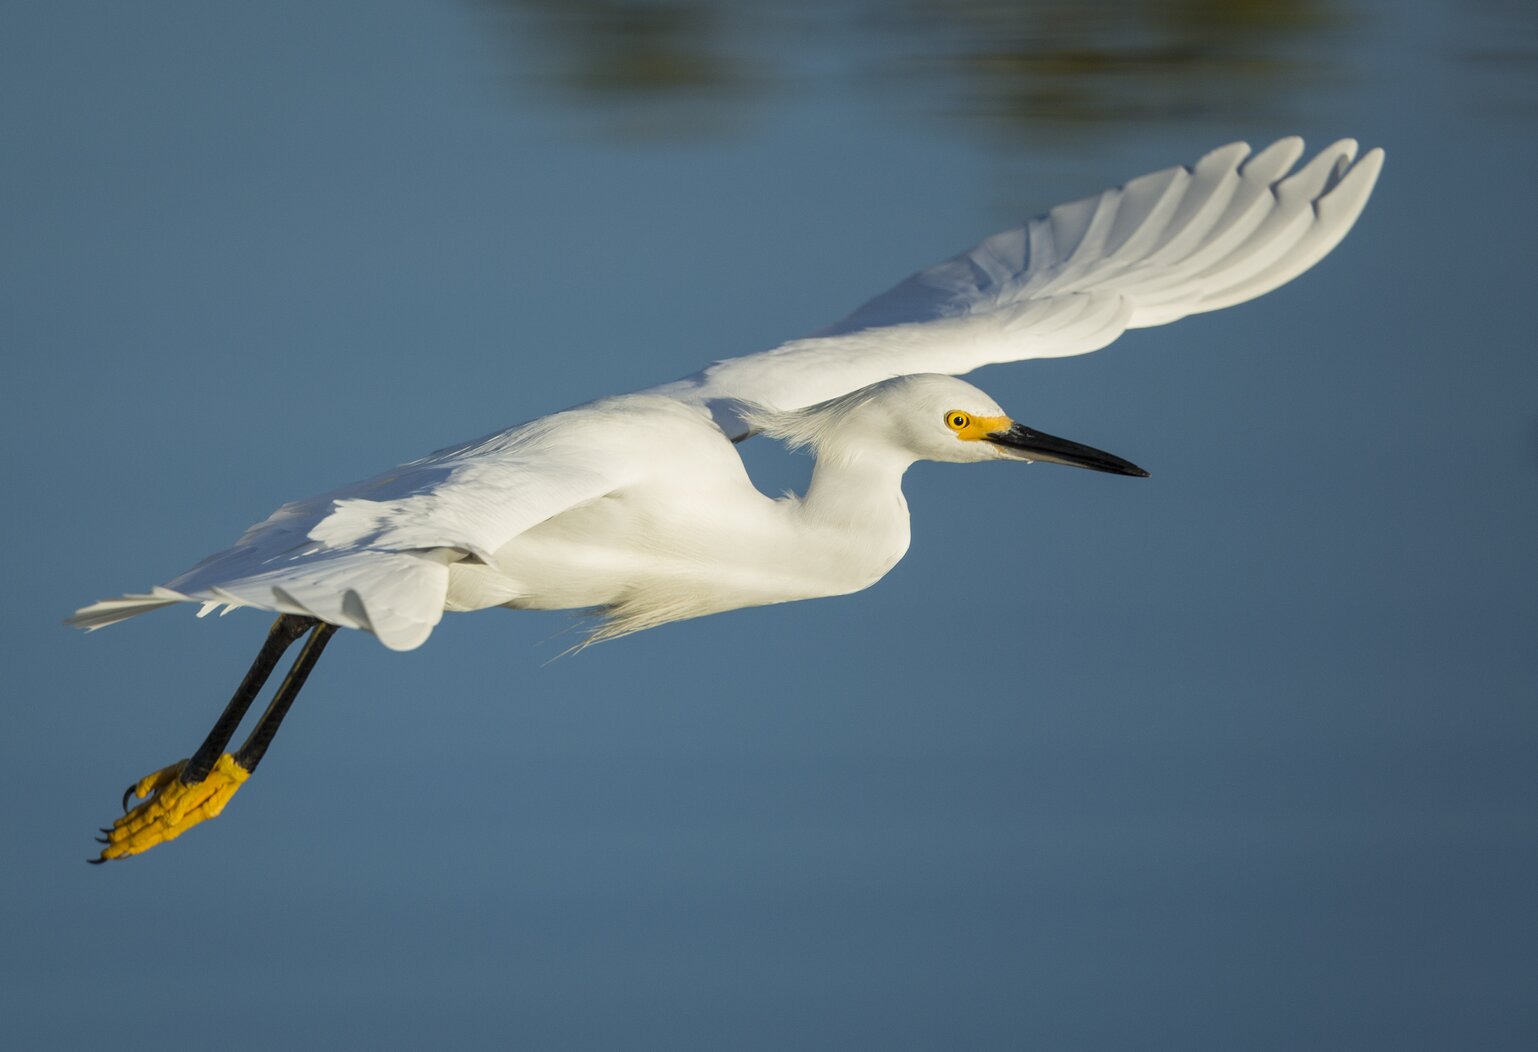 Snowy Egrets frequently forage in the marshes of Alley Creek. Photo: Lindsay Donald/Audubon Photography Awards